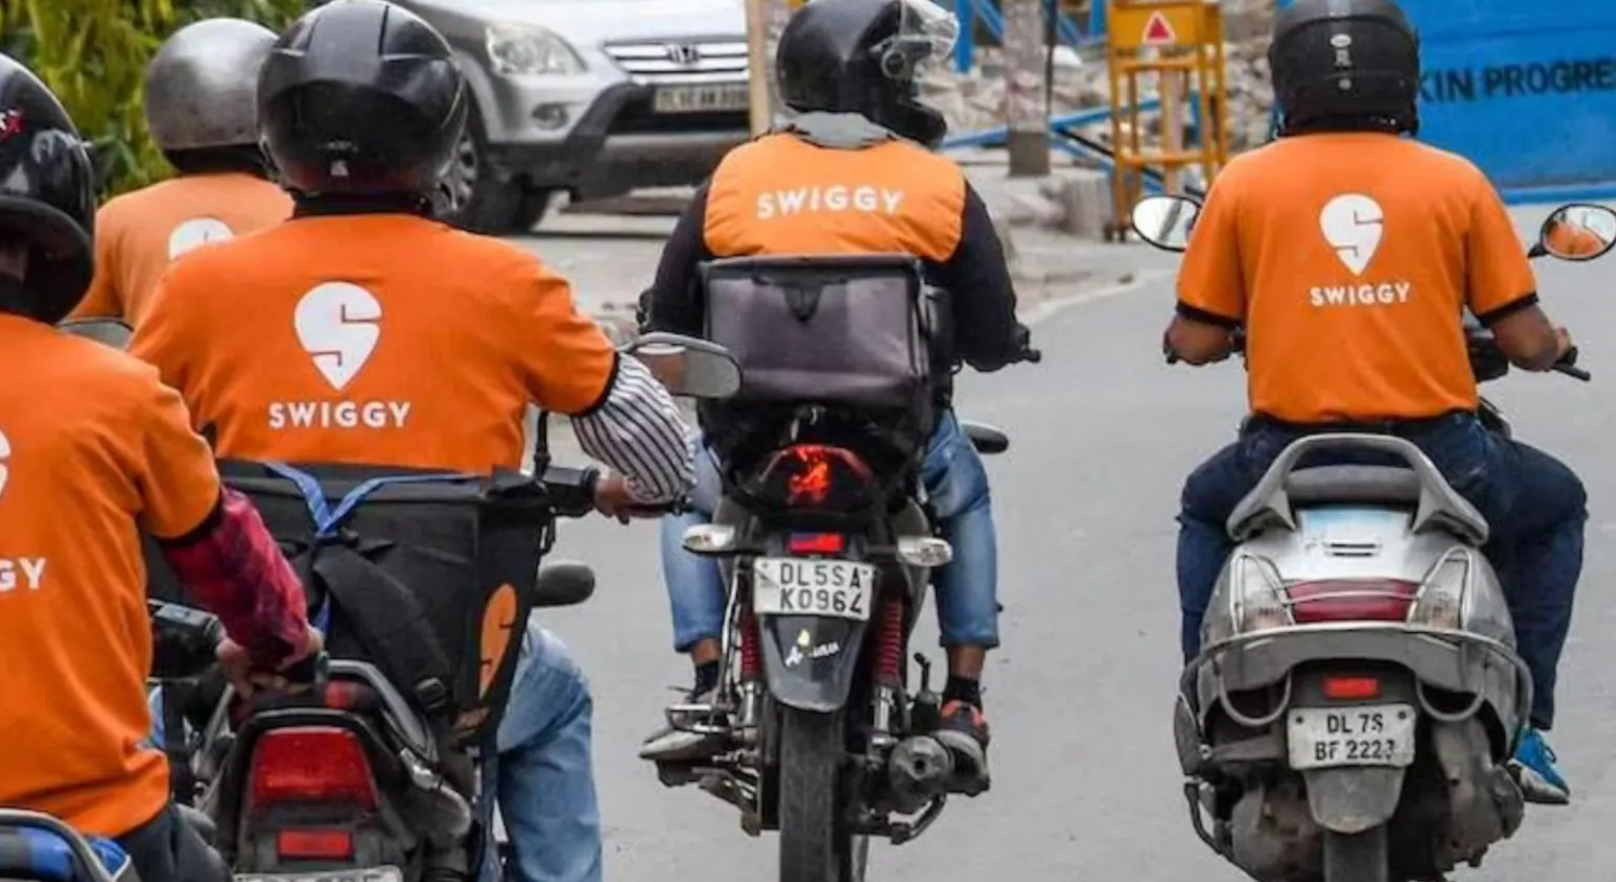 Swiggy One and Zomato Gold reduce free delivery radius from 10 km to 7 km